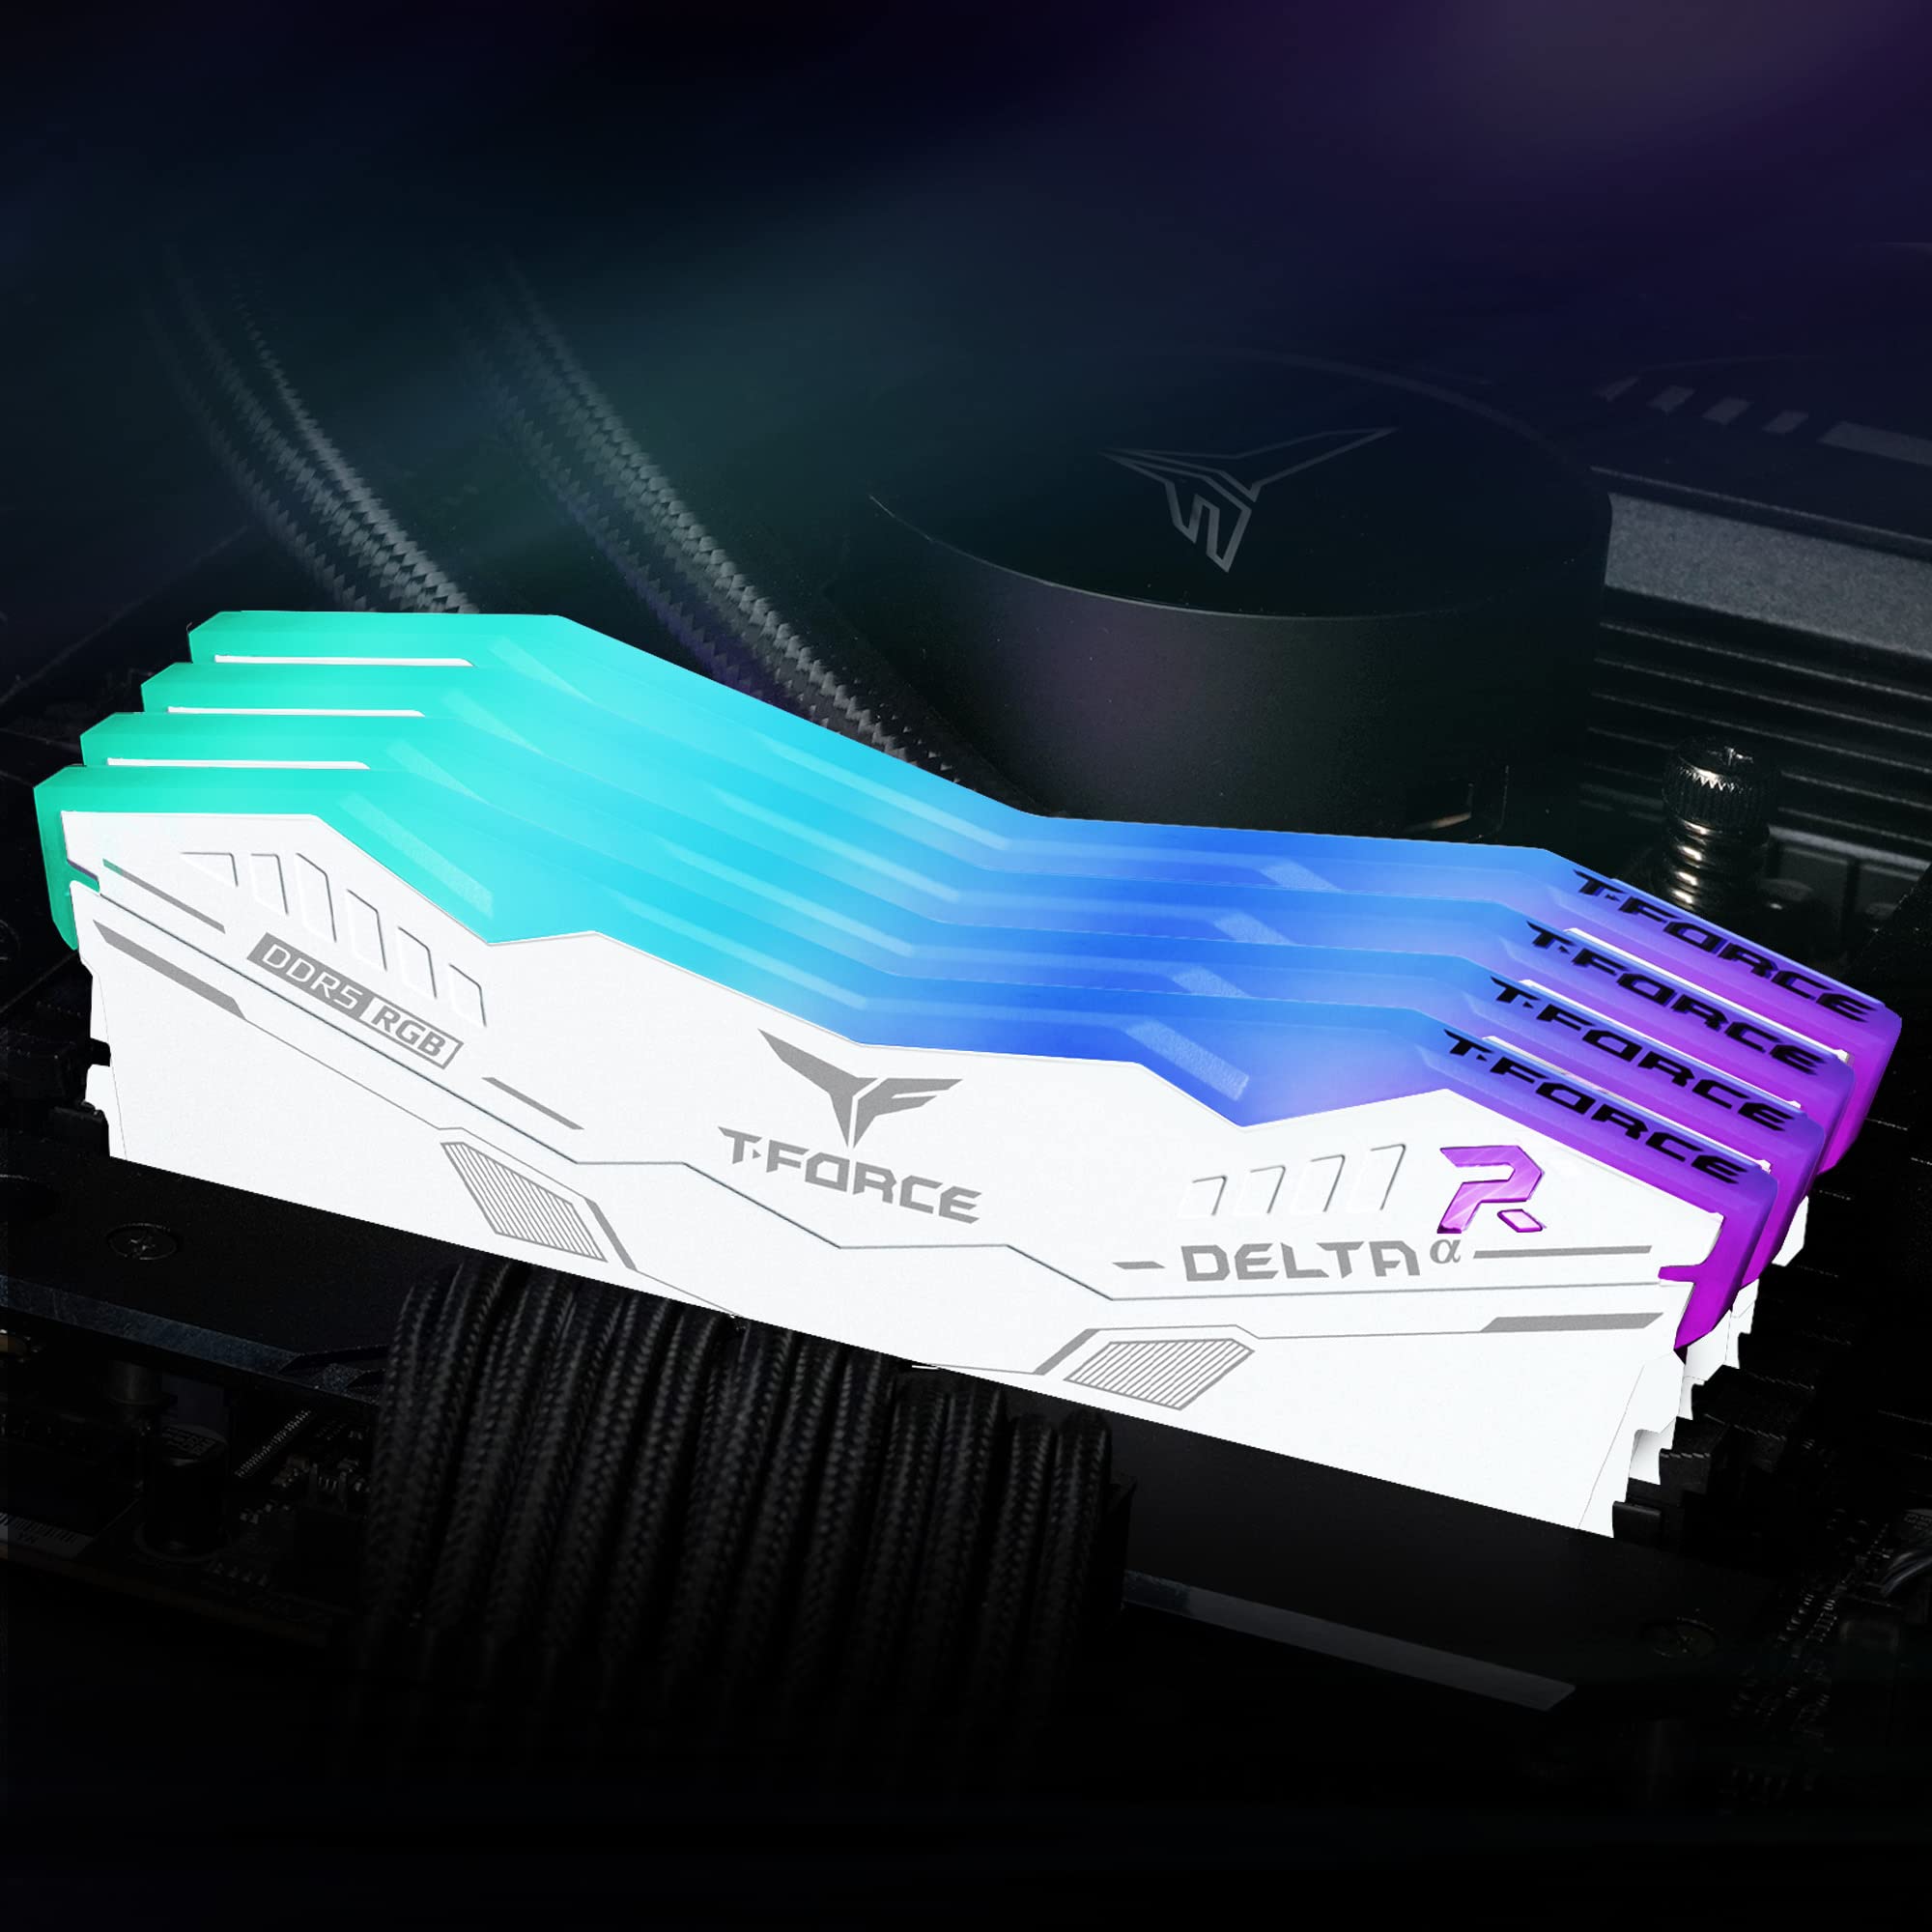 TEAMGROUP T-Force Delta Alpha RGB DDR5 Ram 32GB Kit (2x16GB) 6000MHz (PC5-48000) CL38 Intel XMP 3.0 & AMD Expo Compatible Desktop Memory Module Ram White - FF8D532G6000HC38ADC01